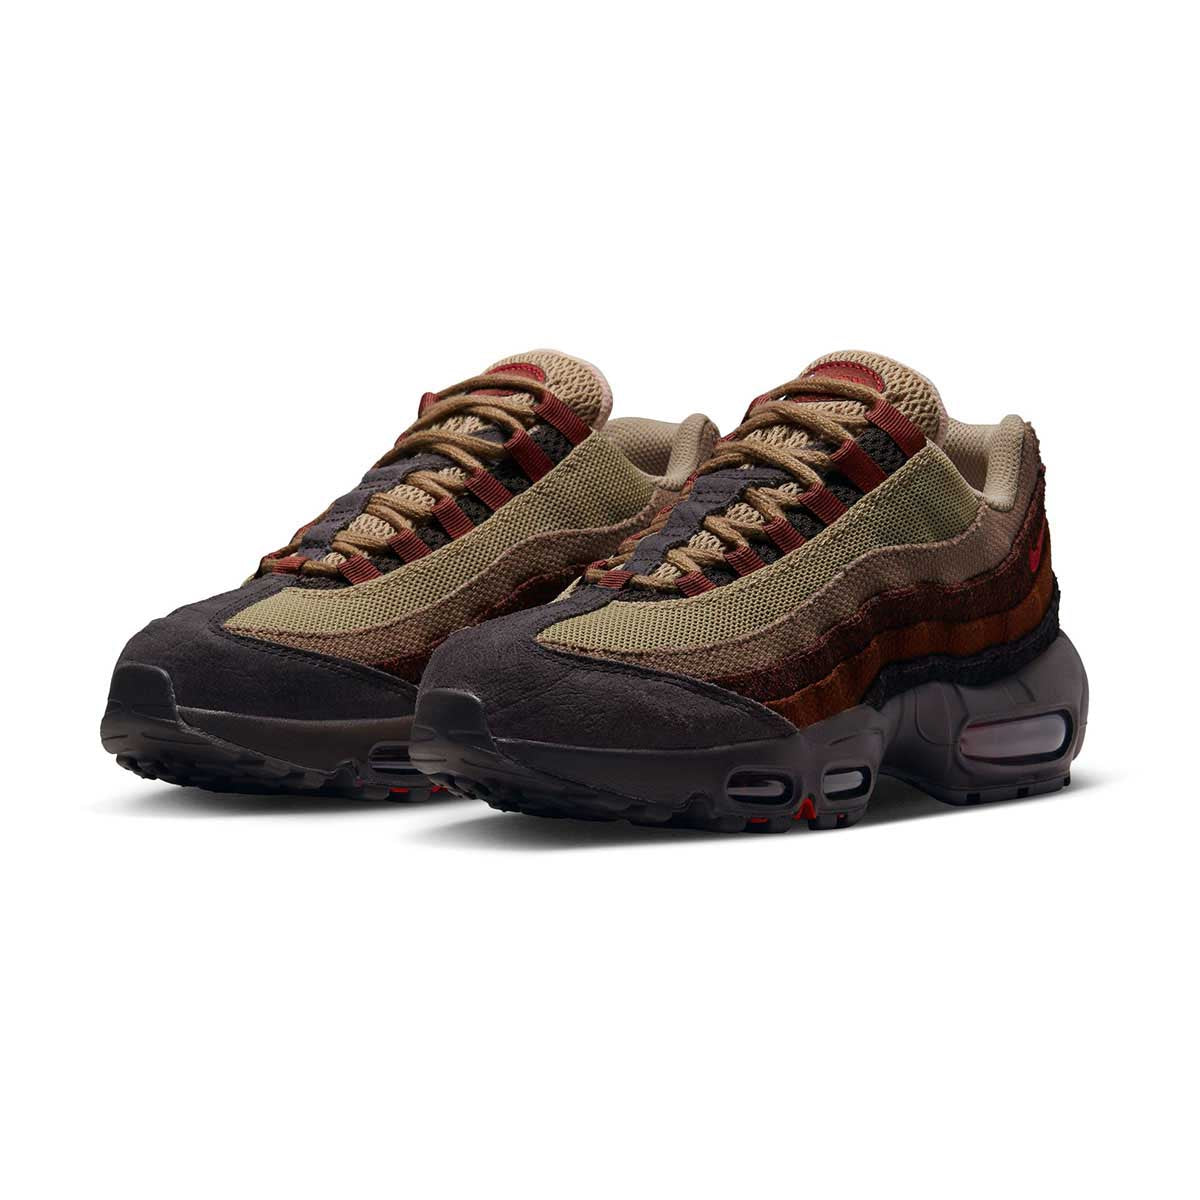 Nike Air Max 95 Women's Shoes - Shoes